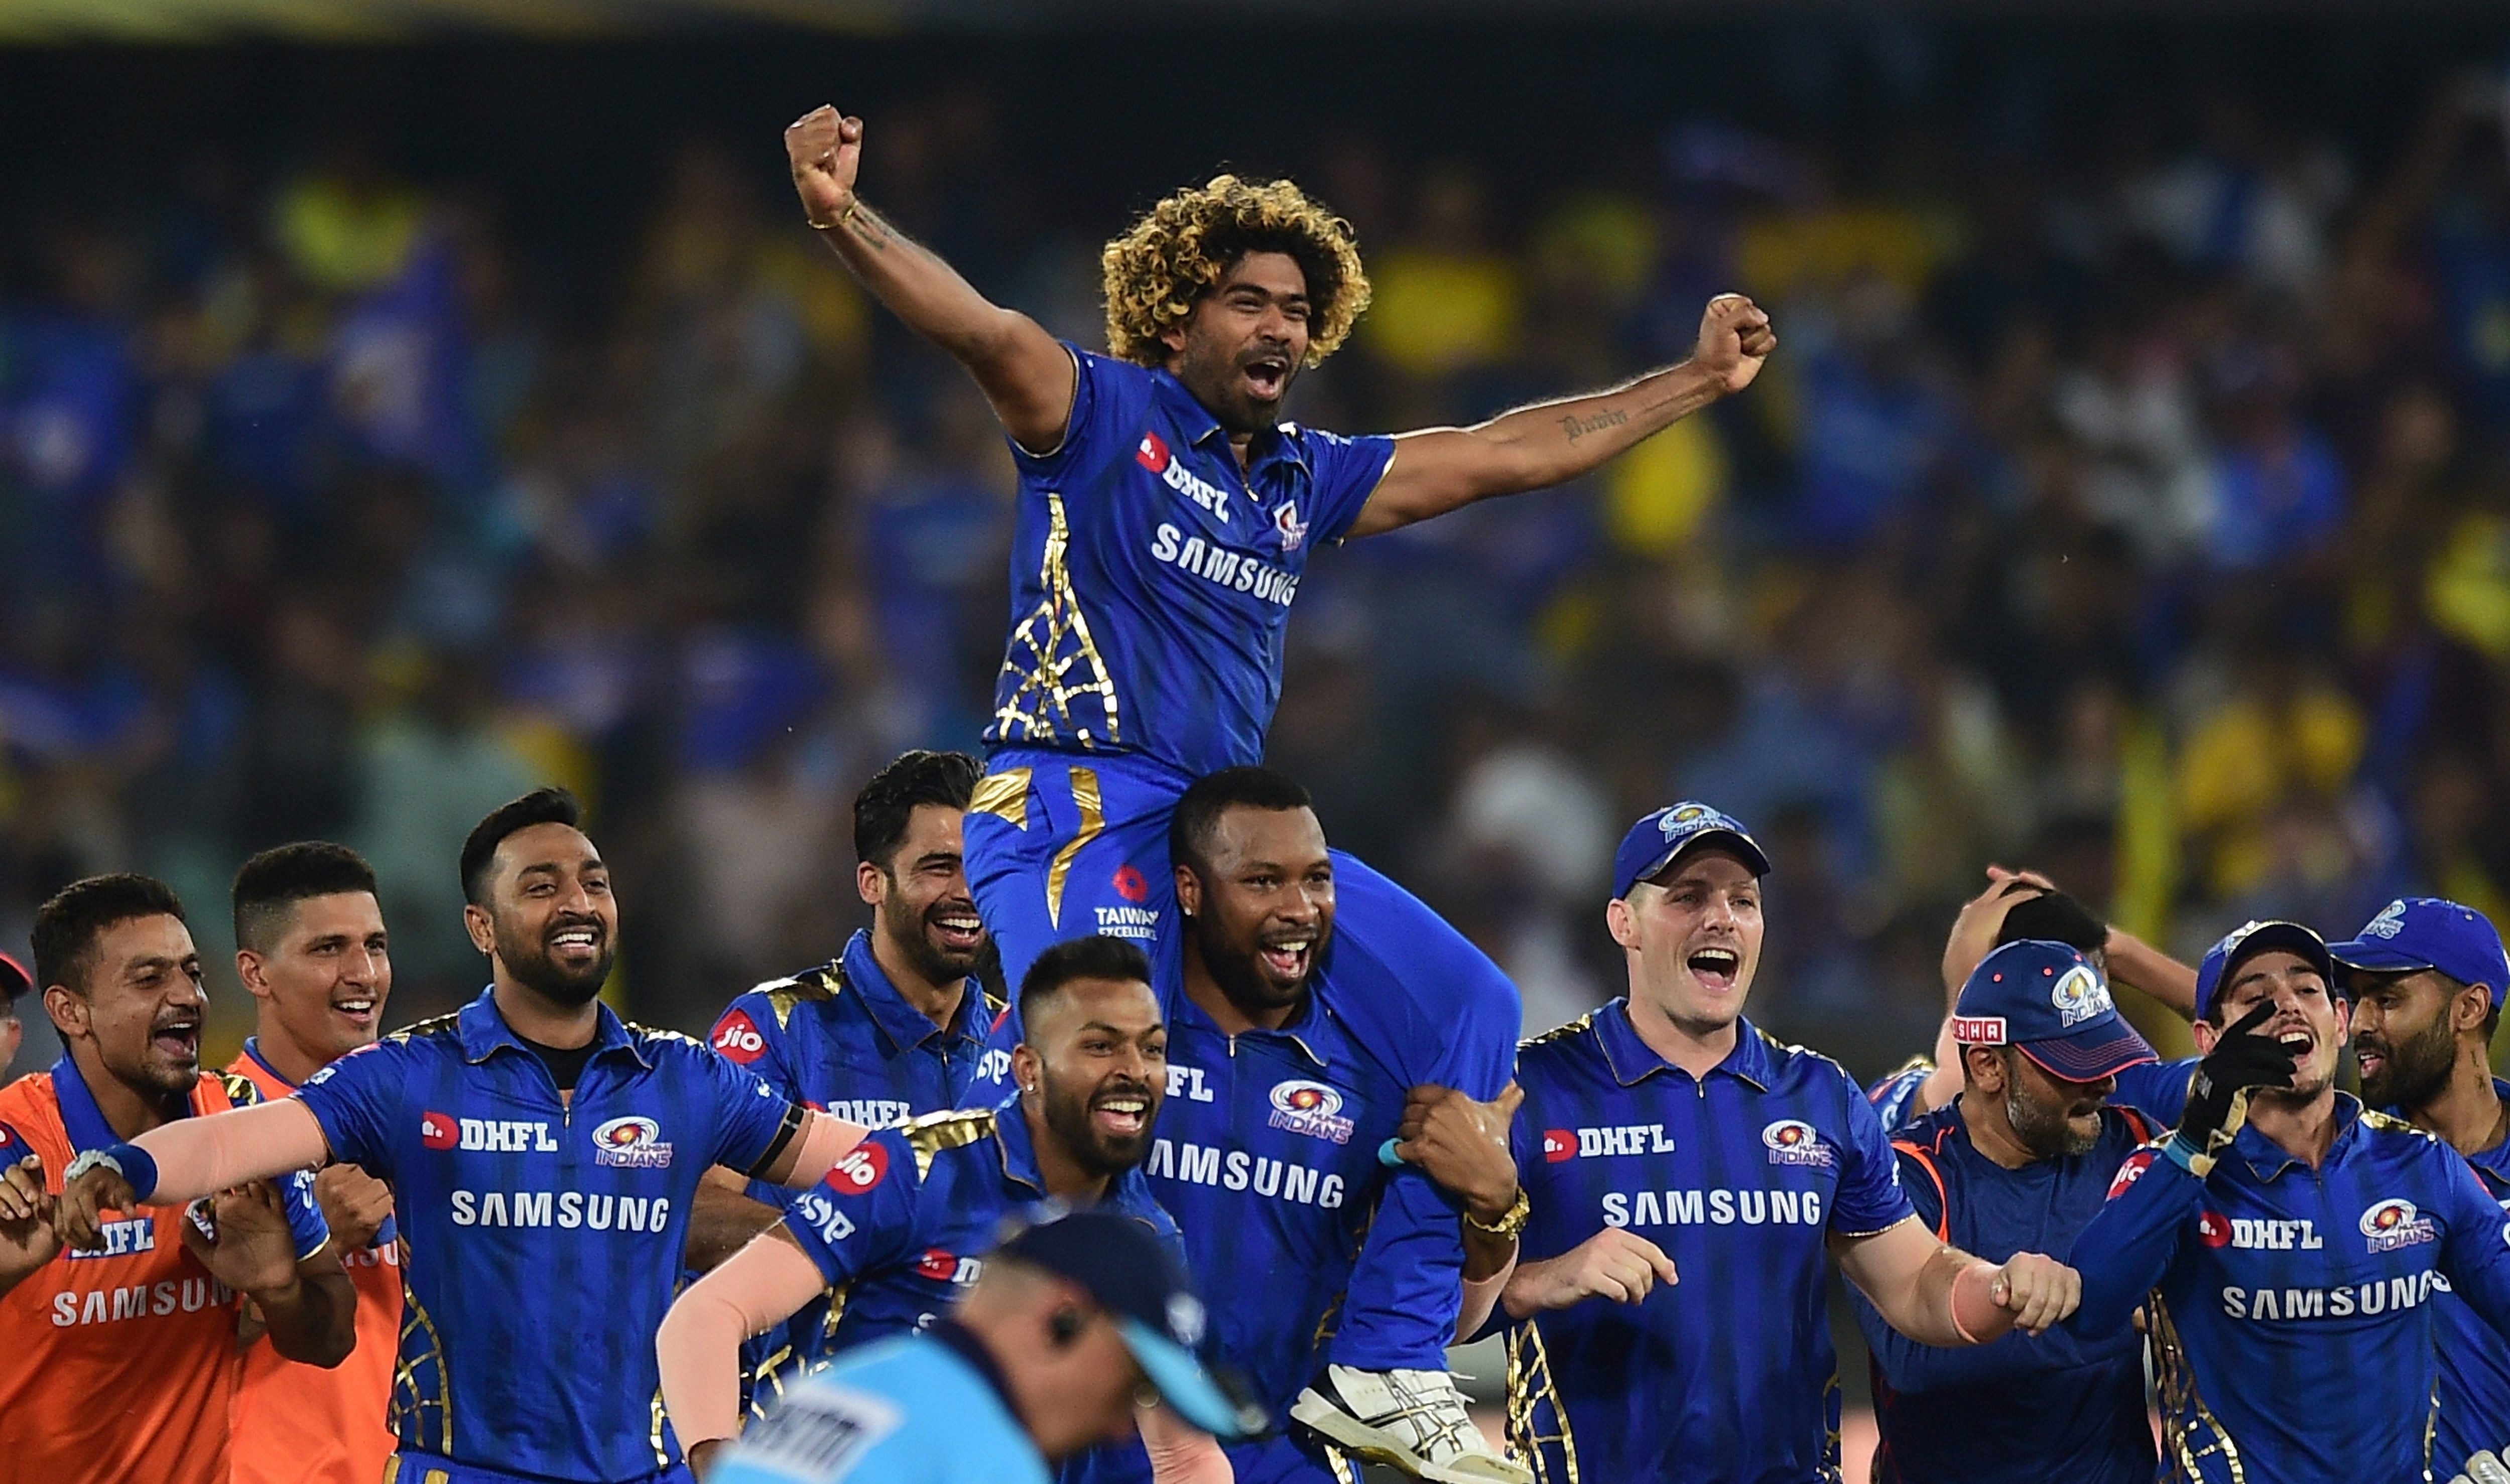 Mumbai Indians (MI) player Keiron Pollard lifts Lasith Malinga on his shoulders as they celebrate their win over Chennai Super Kings (CSK) at the Indian Premier League 2019 final cricket match at Rajiv Gandhi International Cricket Stadium in Hyderabad. (PTI Photo)